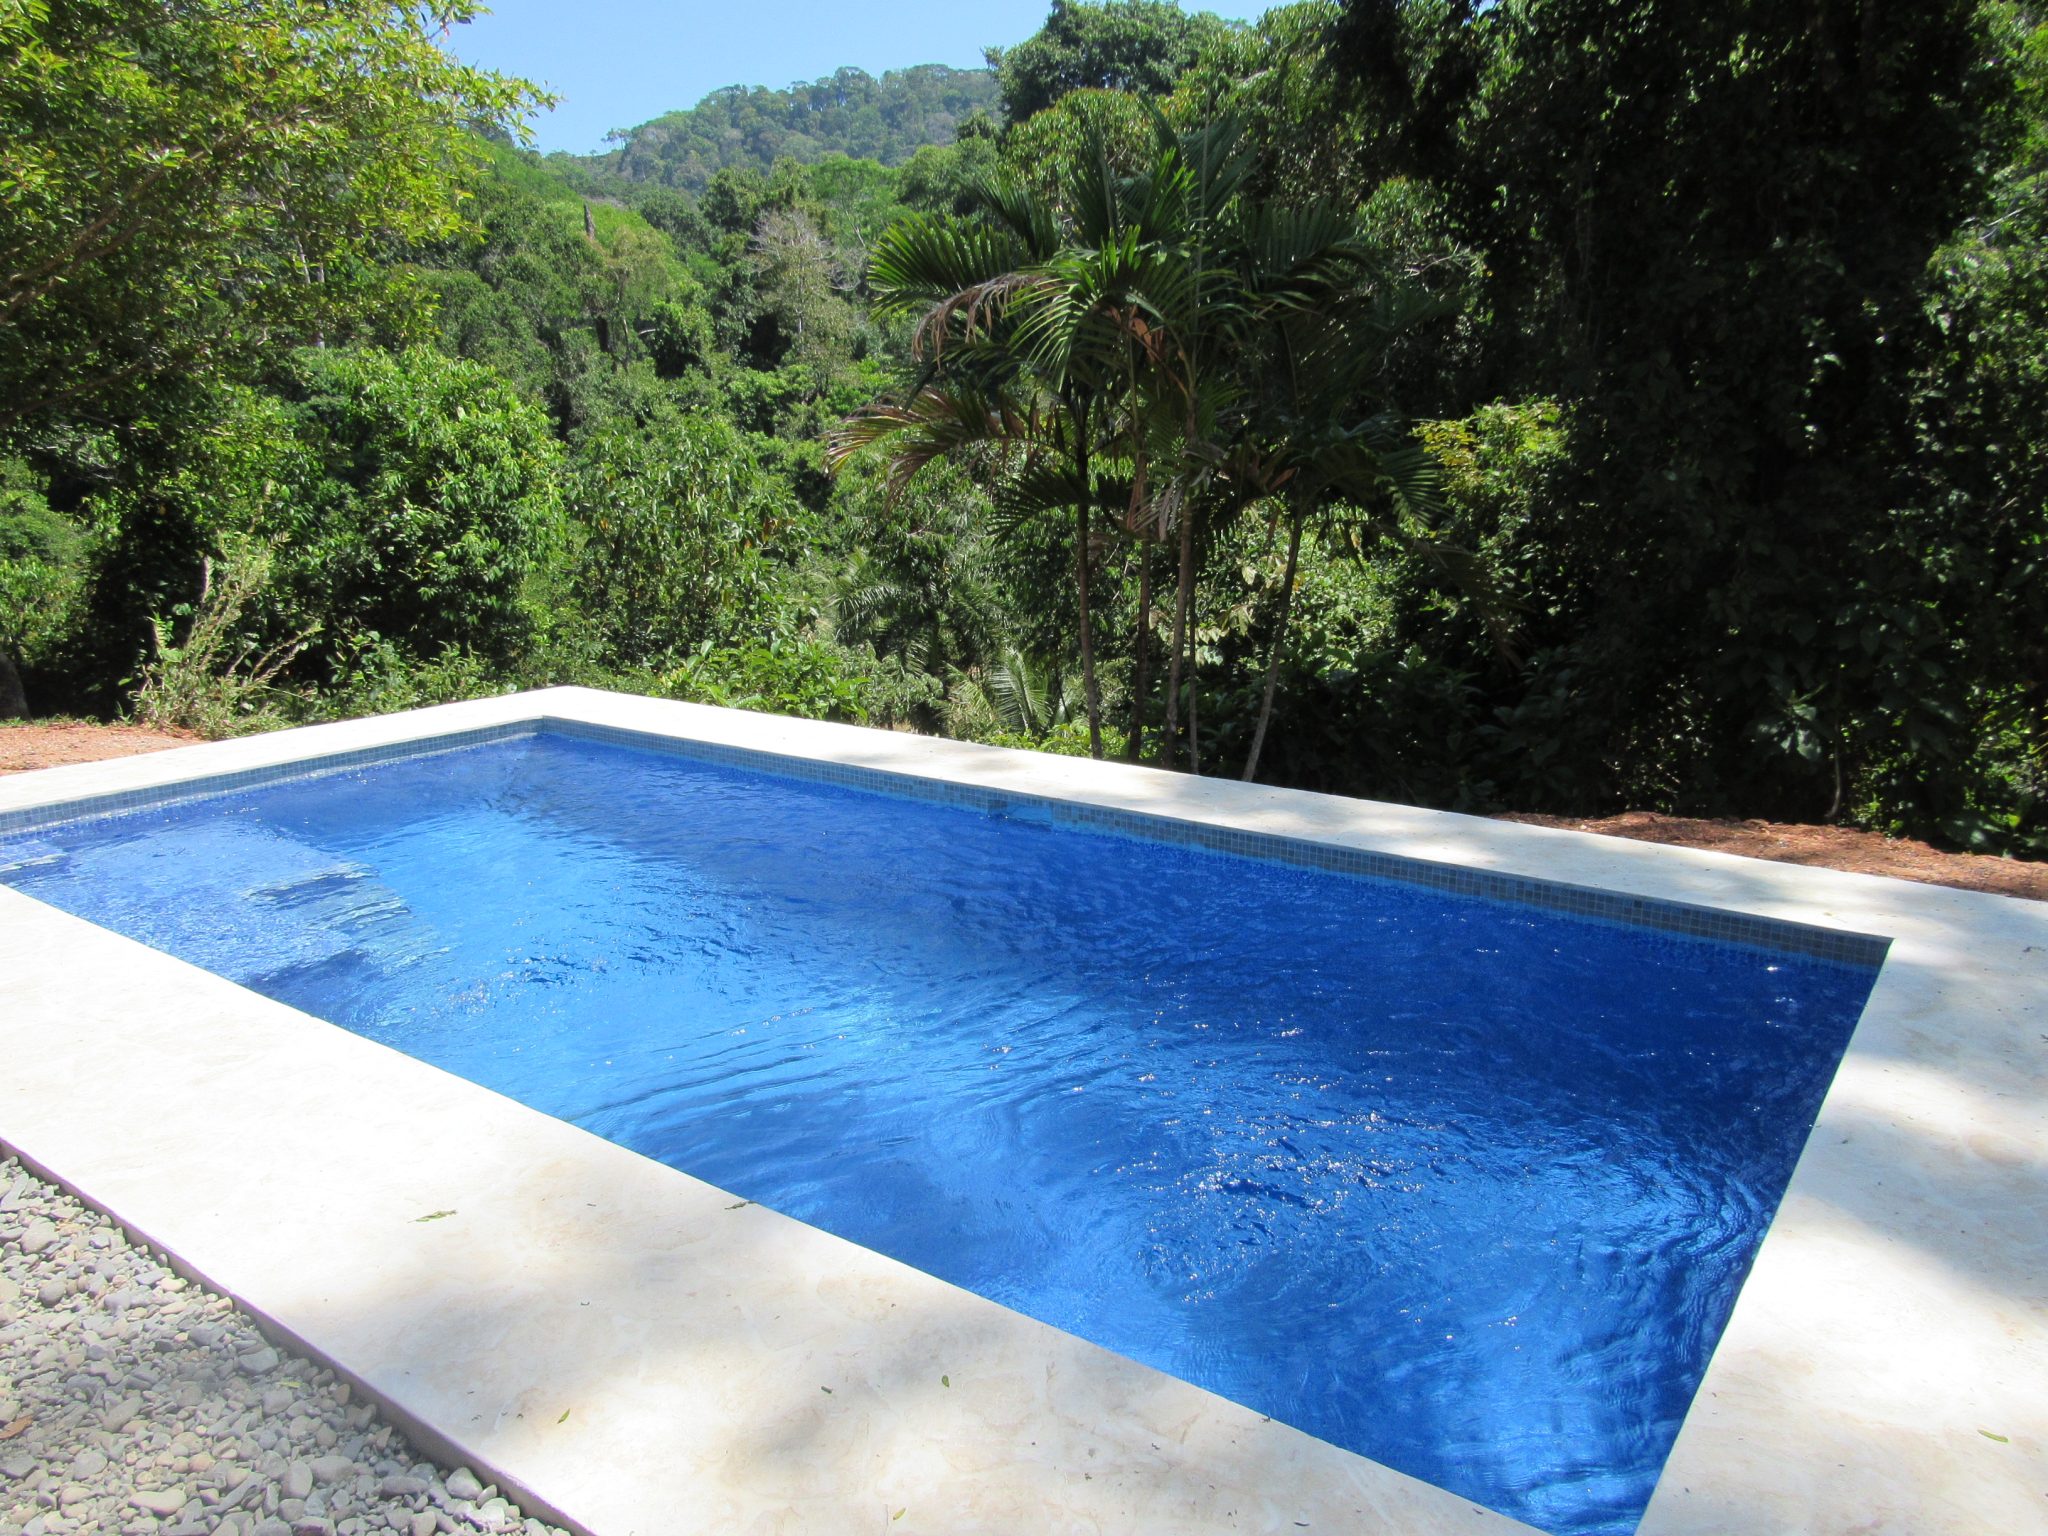 34 ACRES - 3 Bedroom Home Plus Sleeping Loft With Pool and River, Nature Lover's Dream!!!